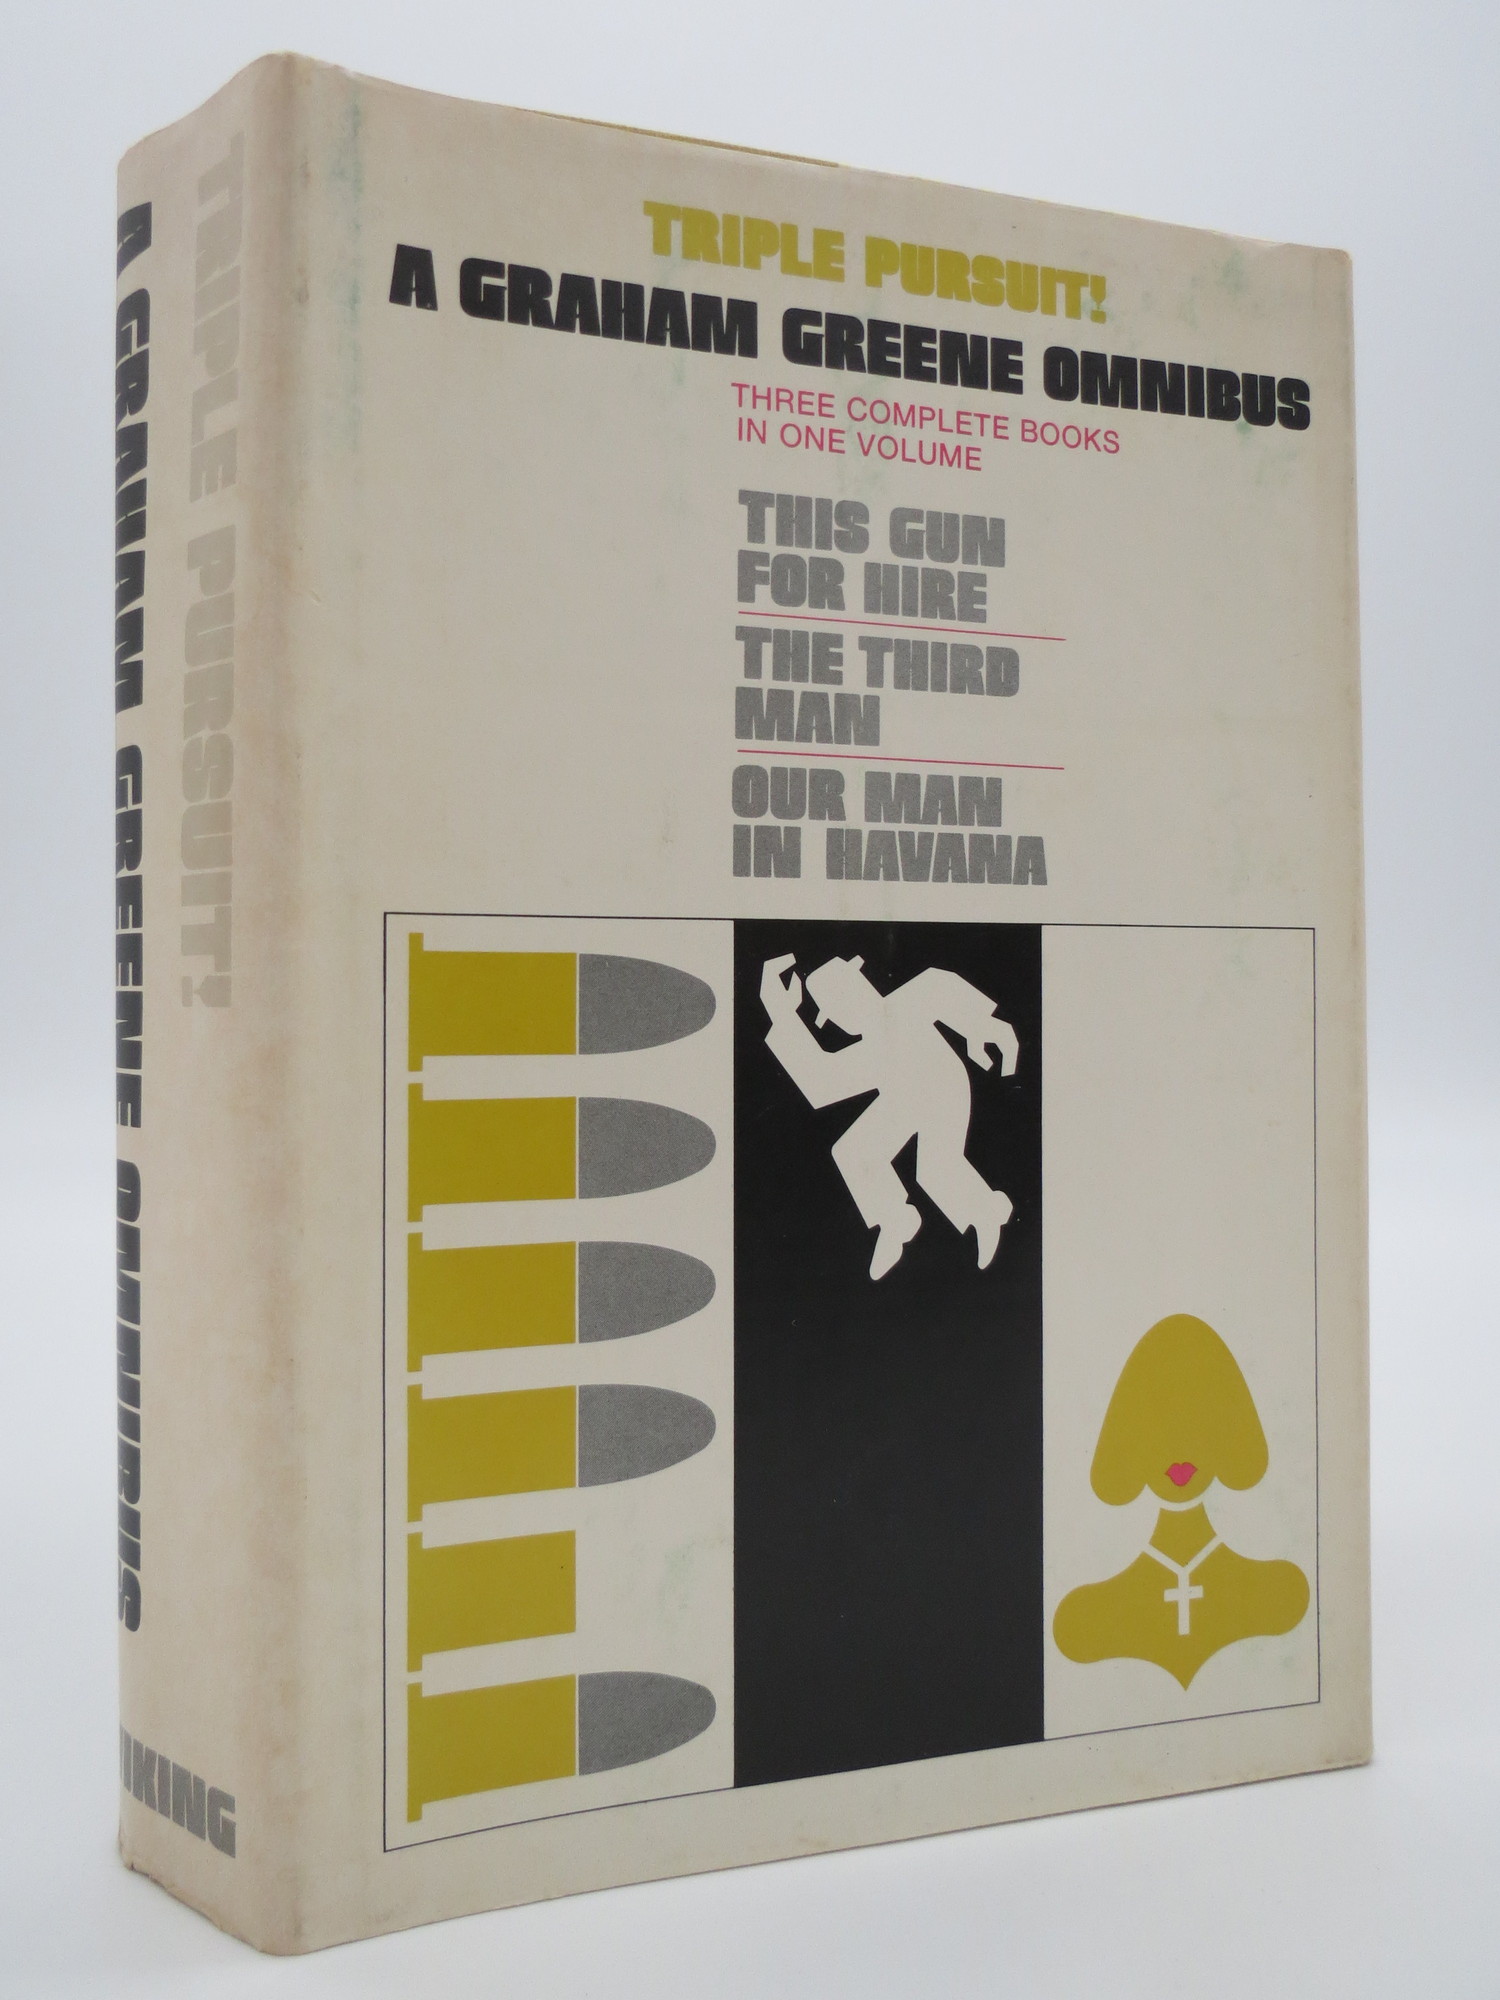 Image for TRIPLE PURSUIT A Graham Greene Omnibus This Gun for Hire, the Third Man, Our Man in Havana